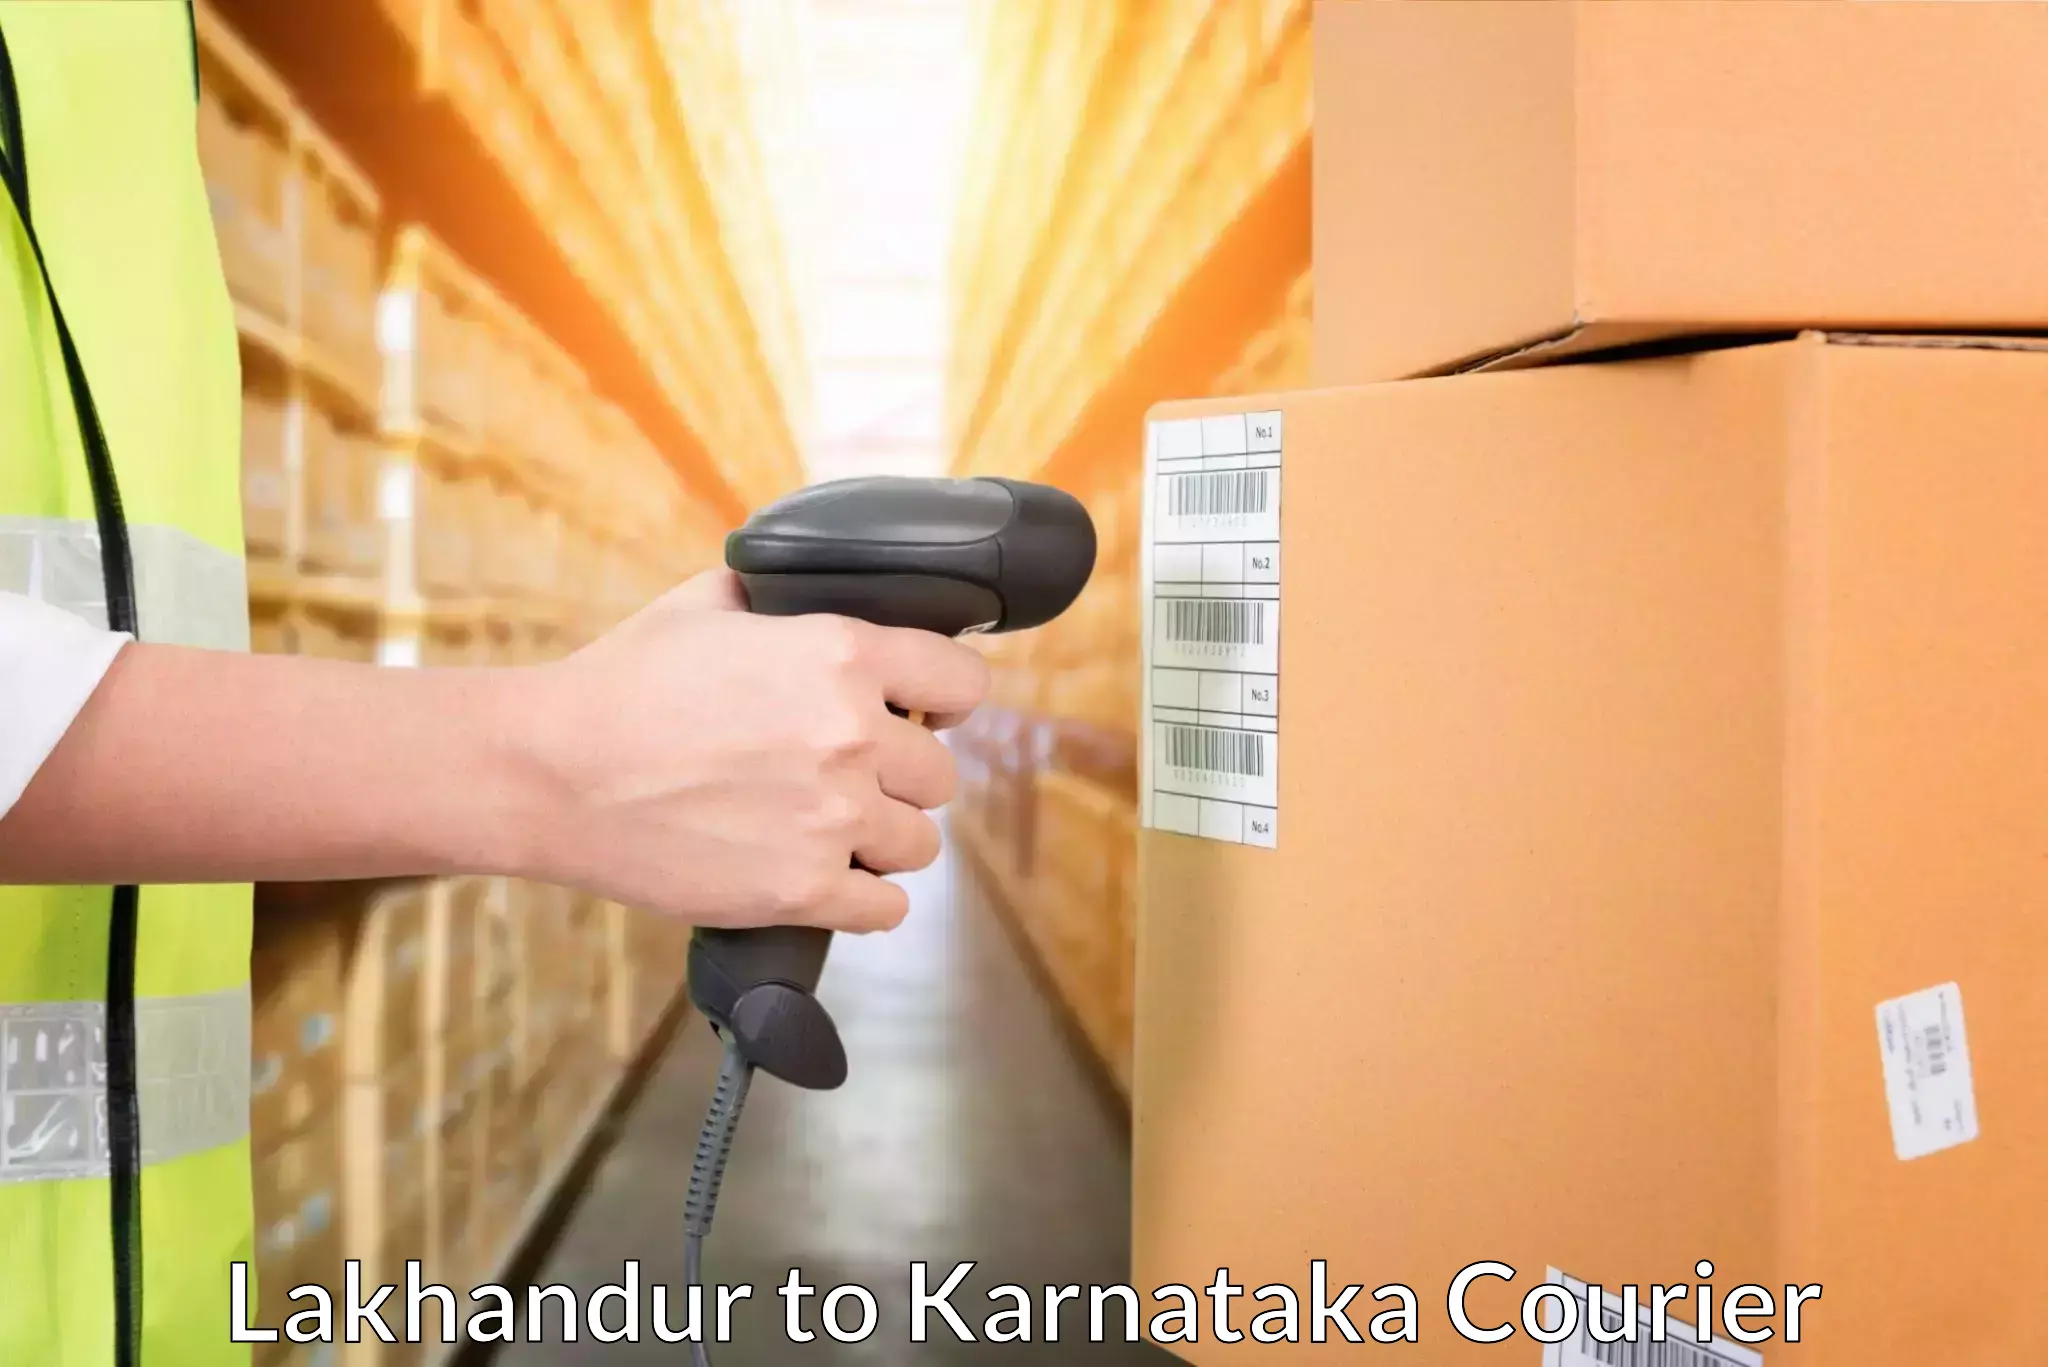 Affordable parcel service Lakhandur to yedrami